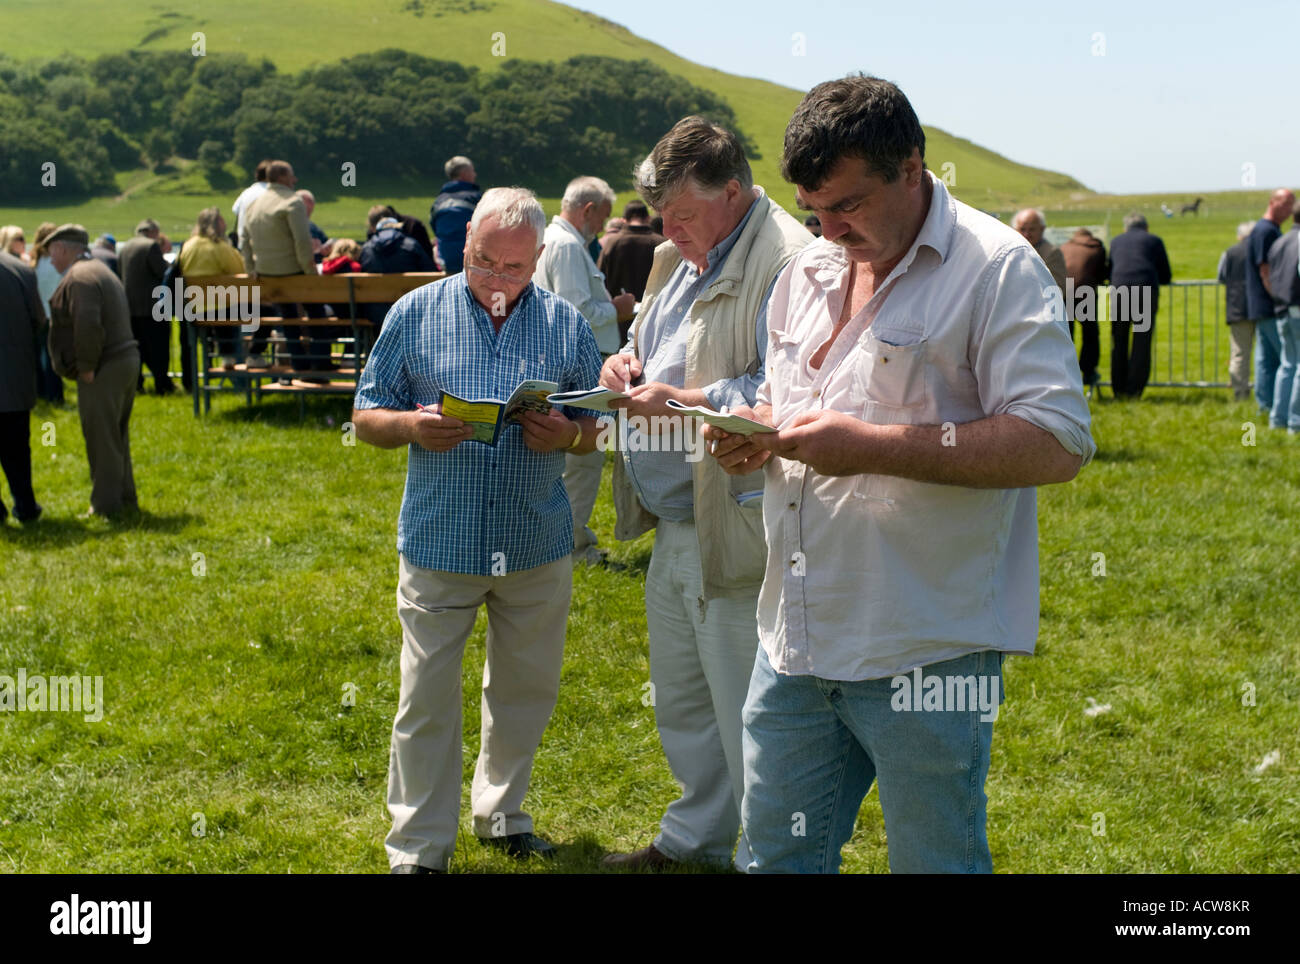 men checking the race programme for horses to bet on harness trotting horse races Aberystwyth july 2007 Stock Photo